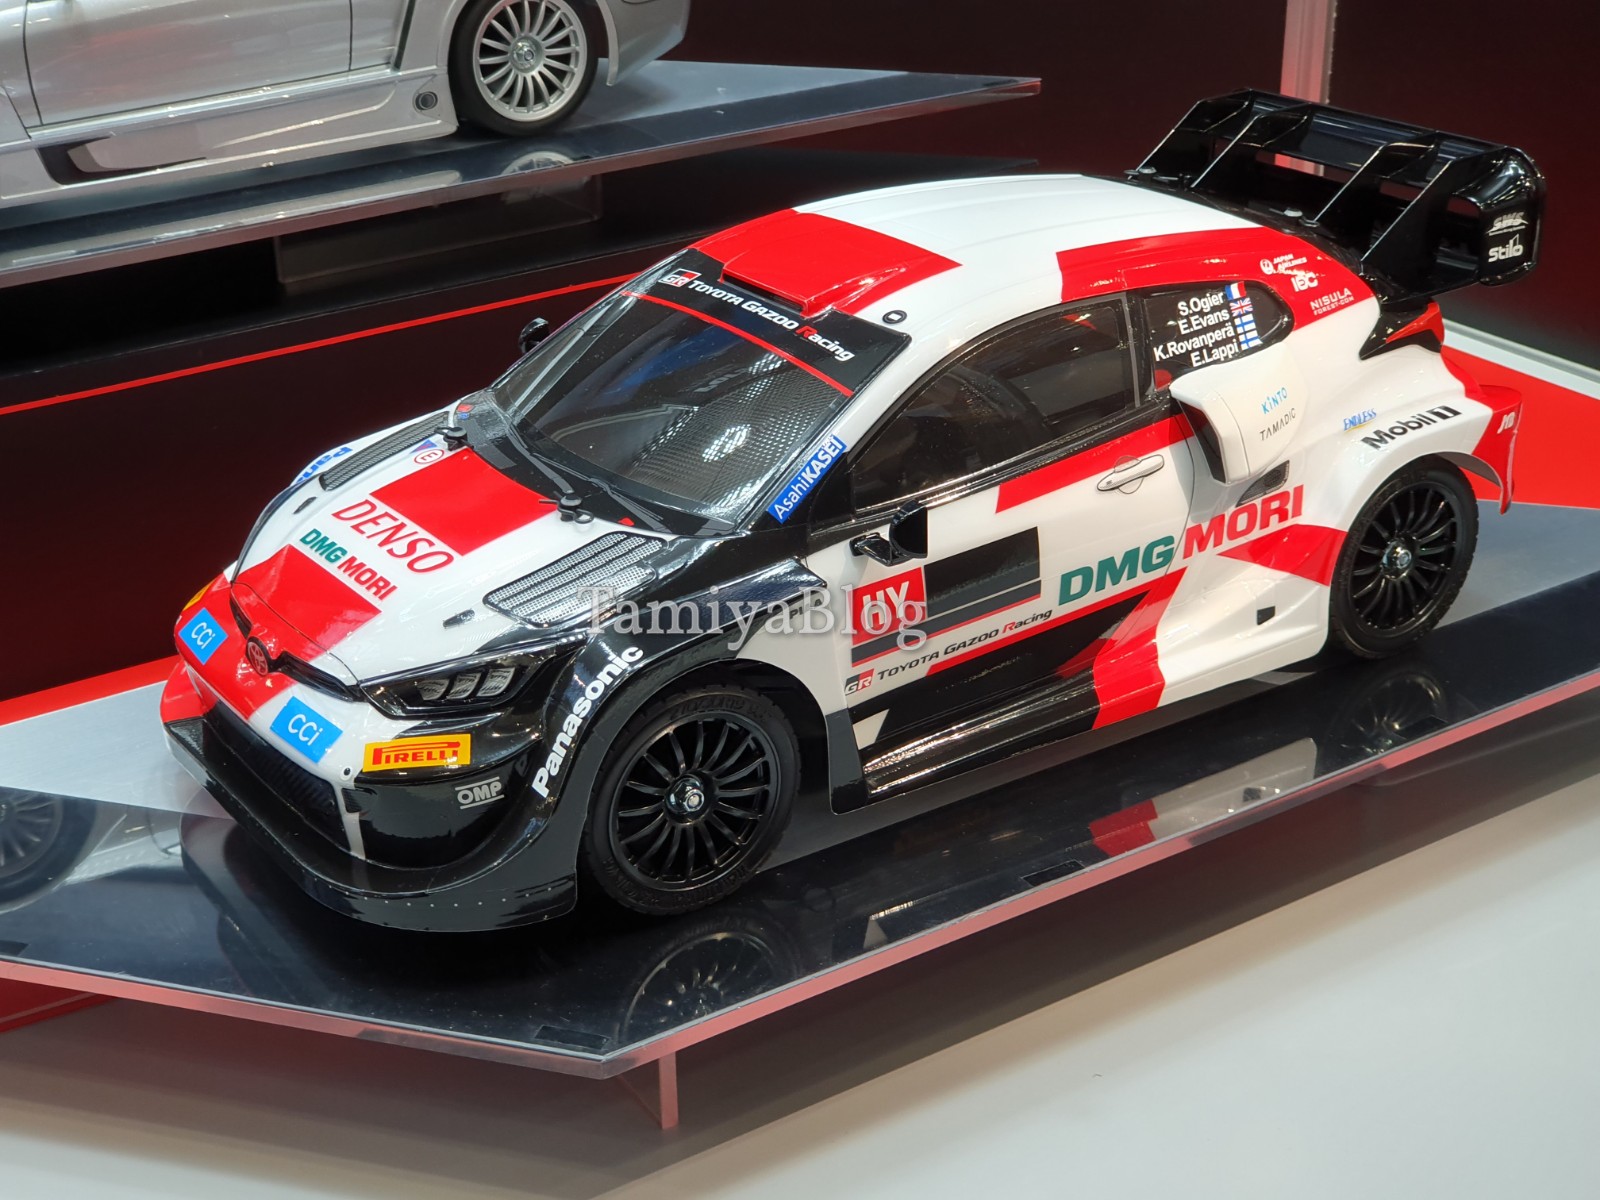 Other new Tamiya RC releases shown at the Nuremberg Toy Fair 2023